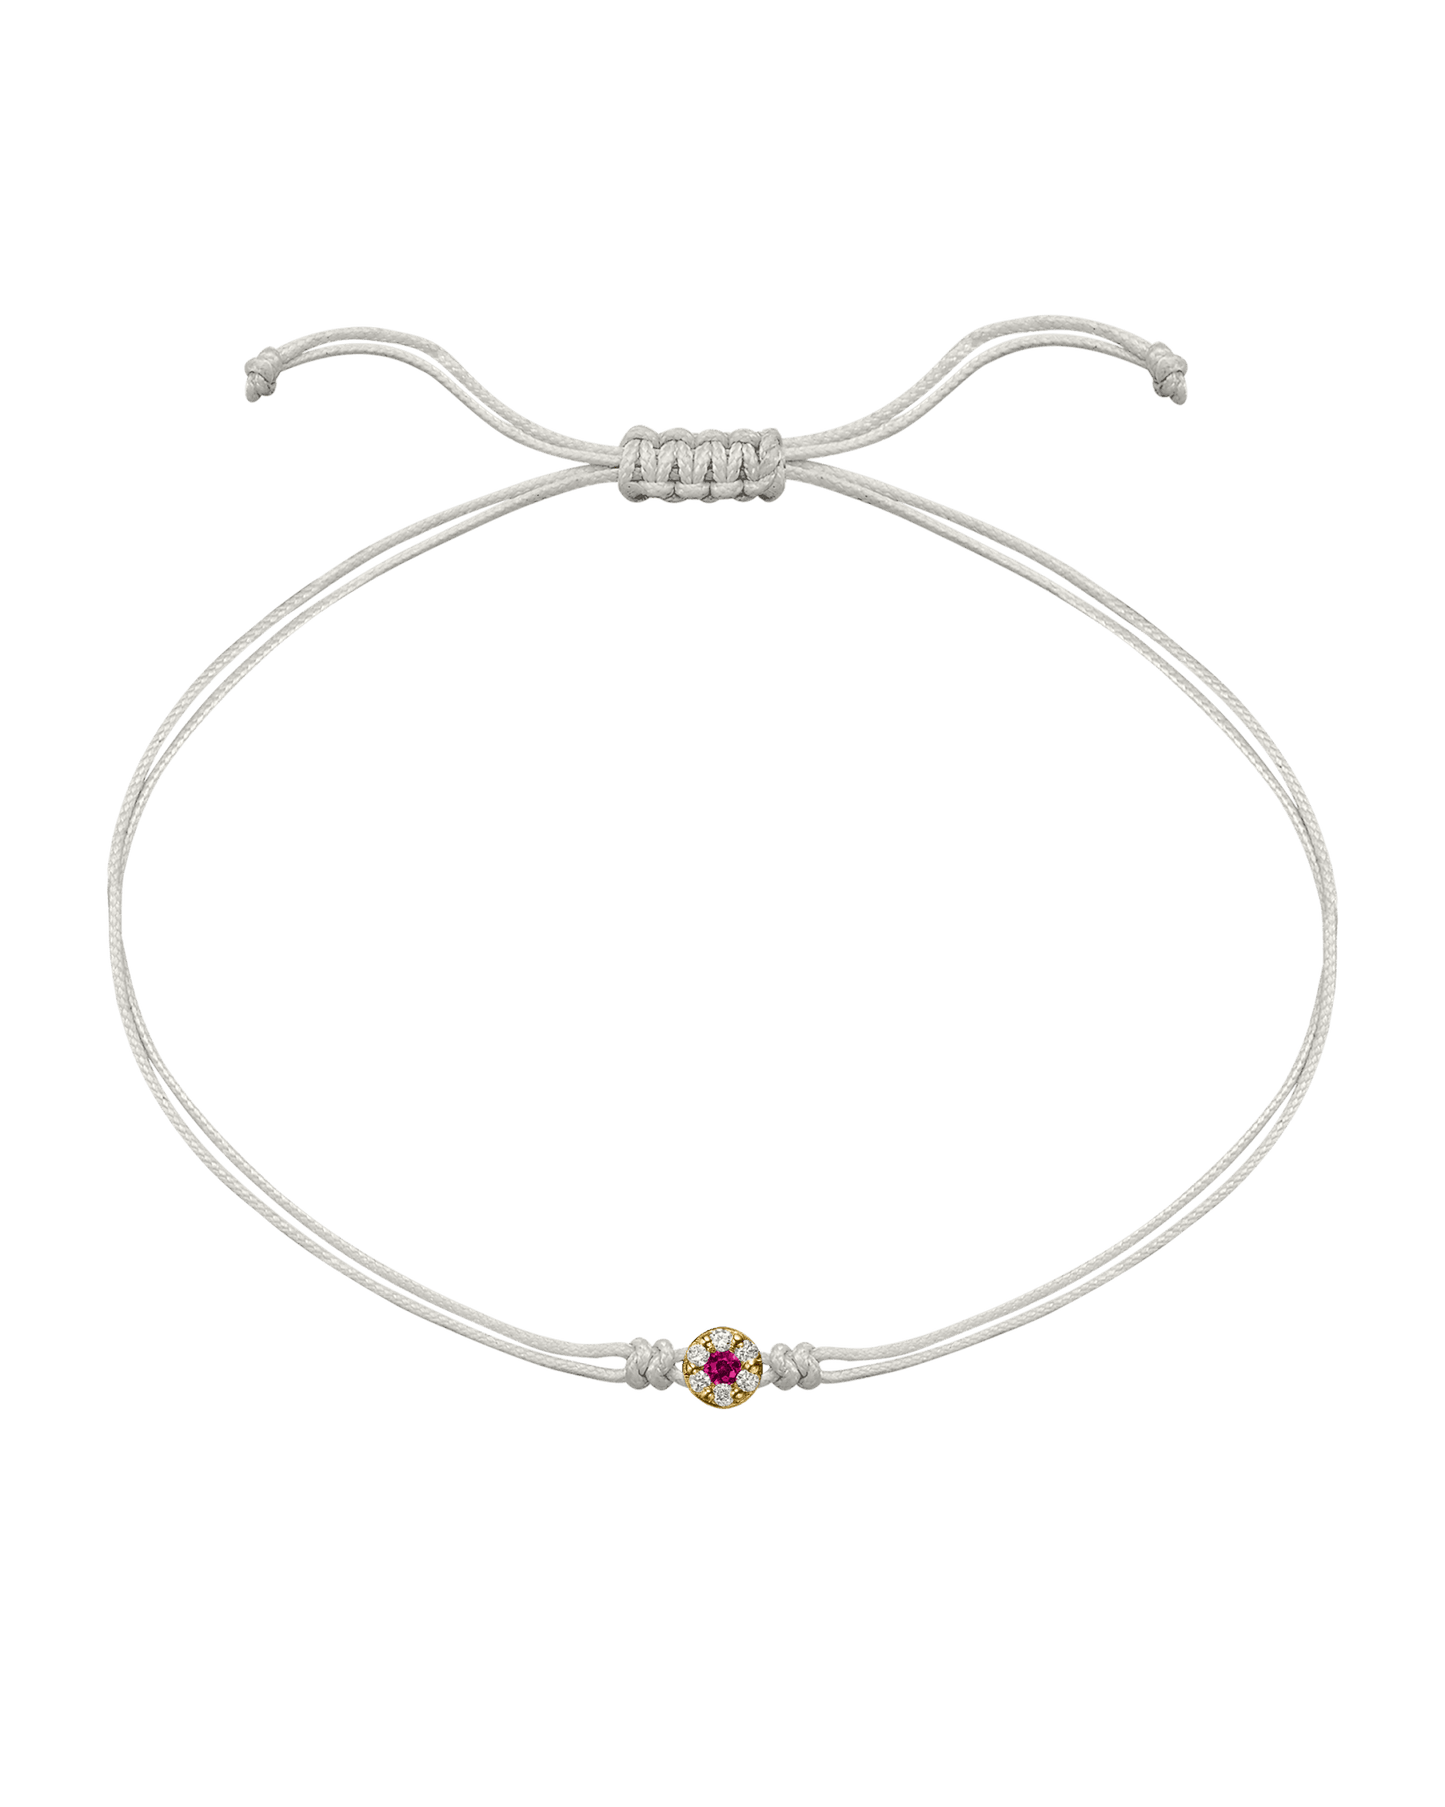 String of Love Diamond and Gemstone - 14K Yellow Gold Bracelet 14K Solid Gold Pearl Ruby 